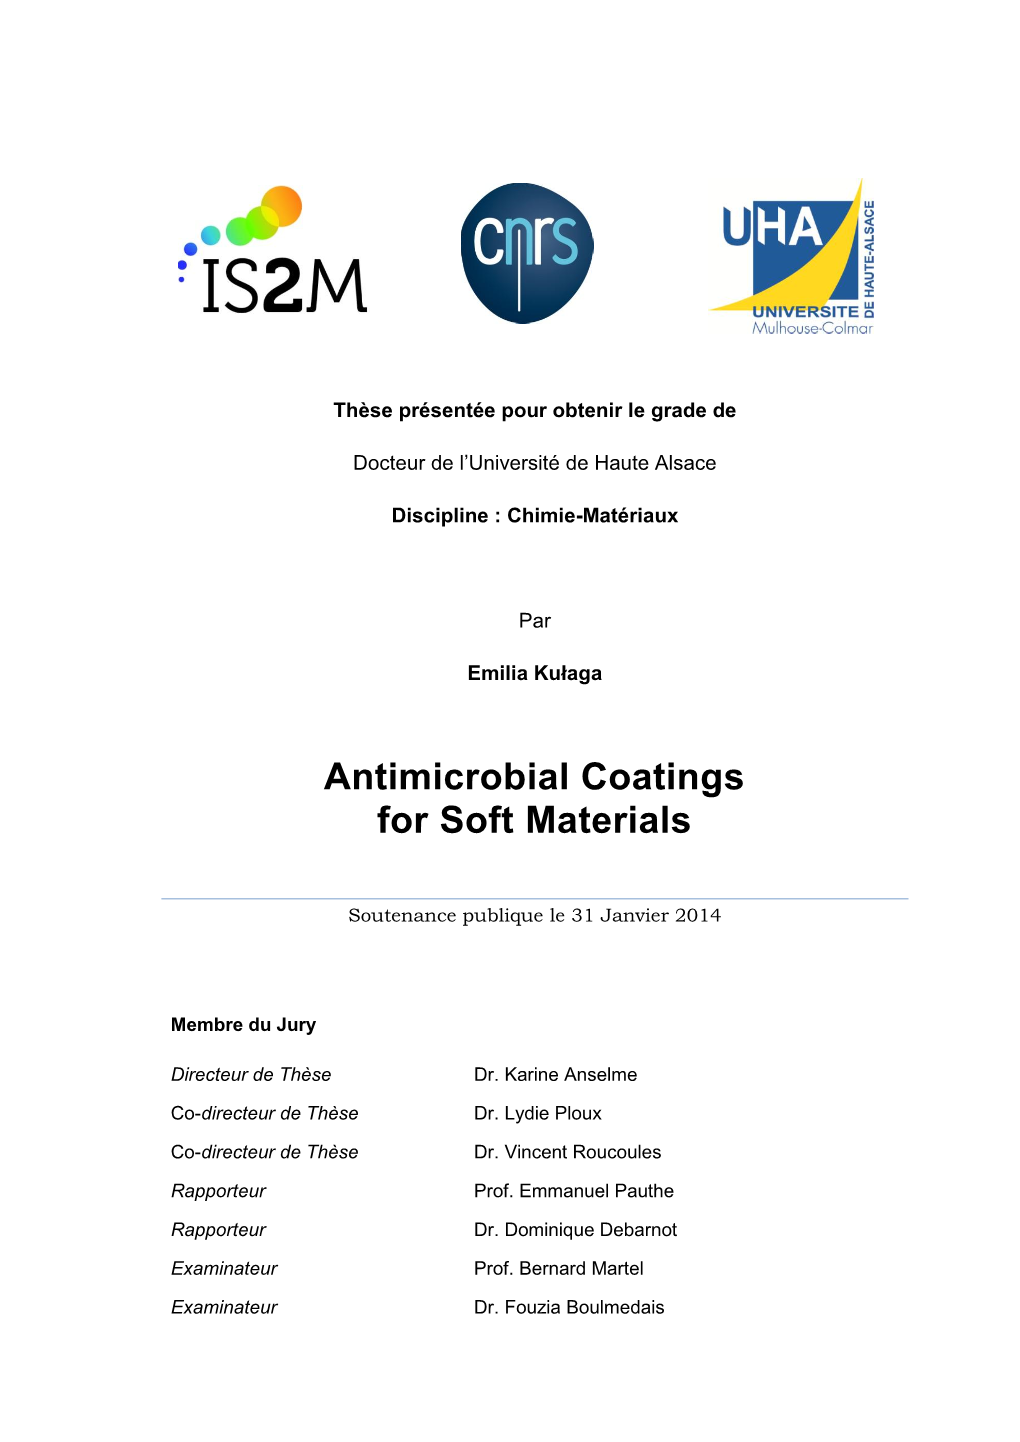 Antimicrobial Coatings for Soft Materials